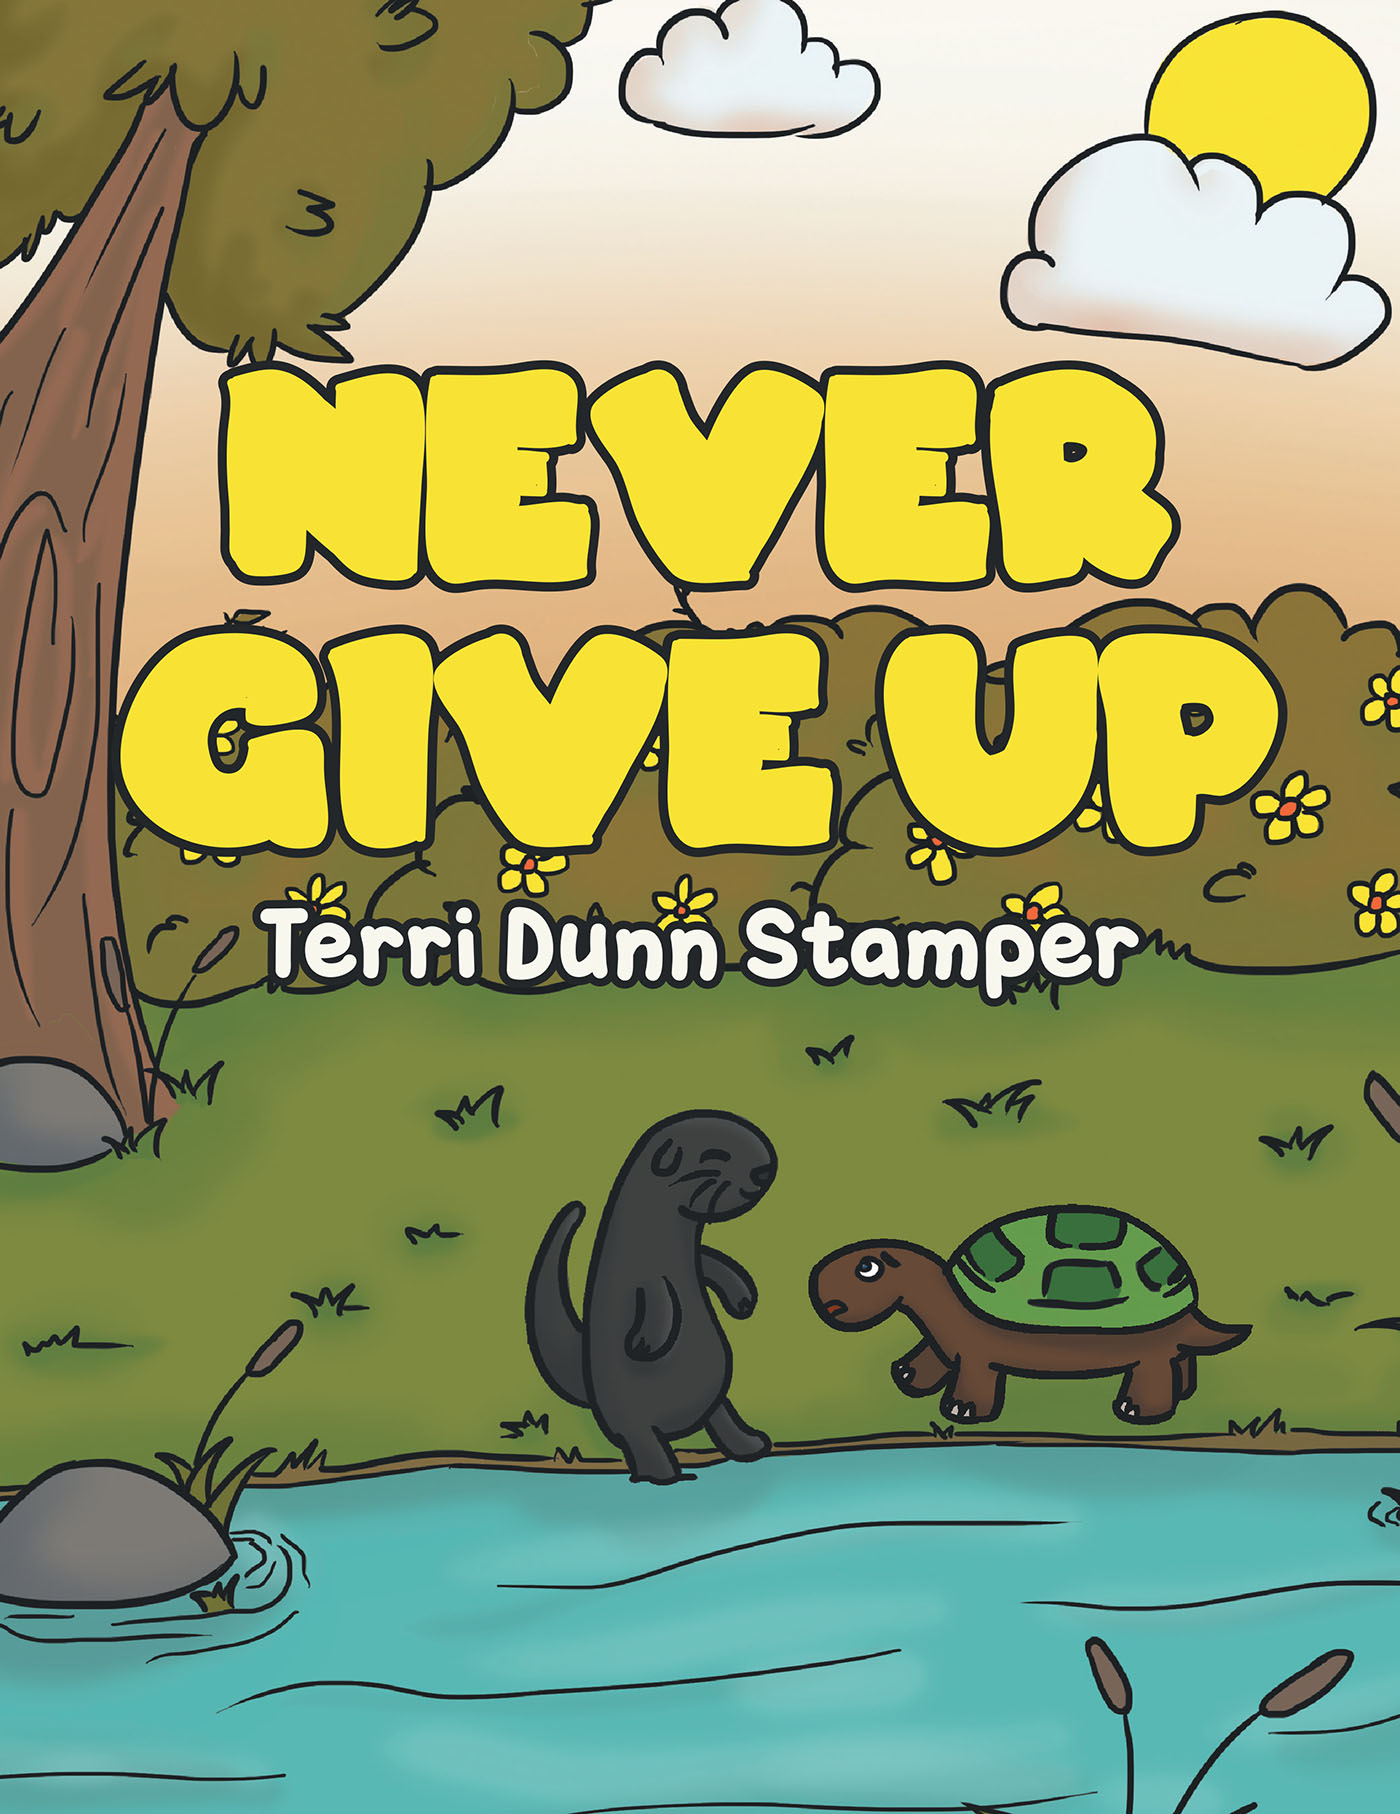 Never Give Up Cover Image